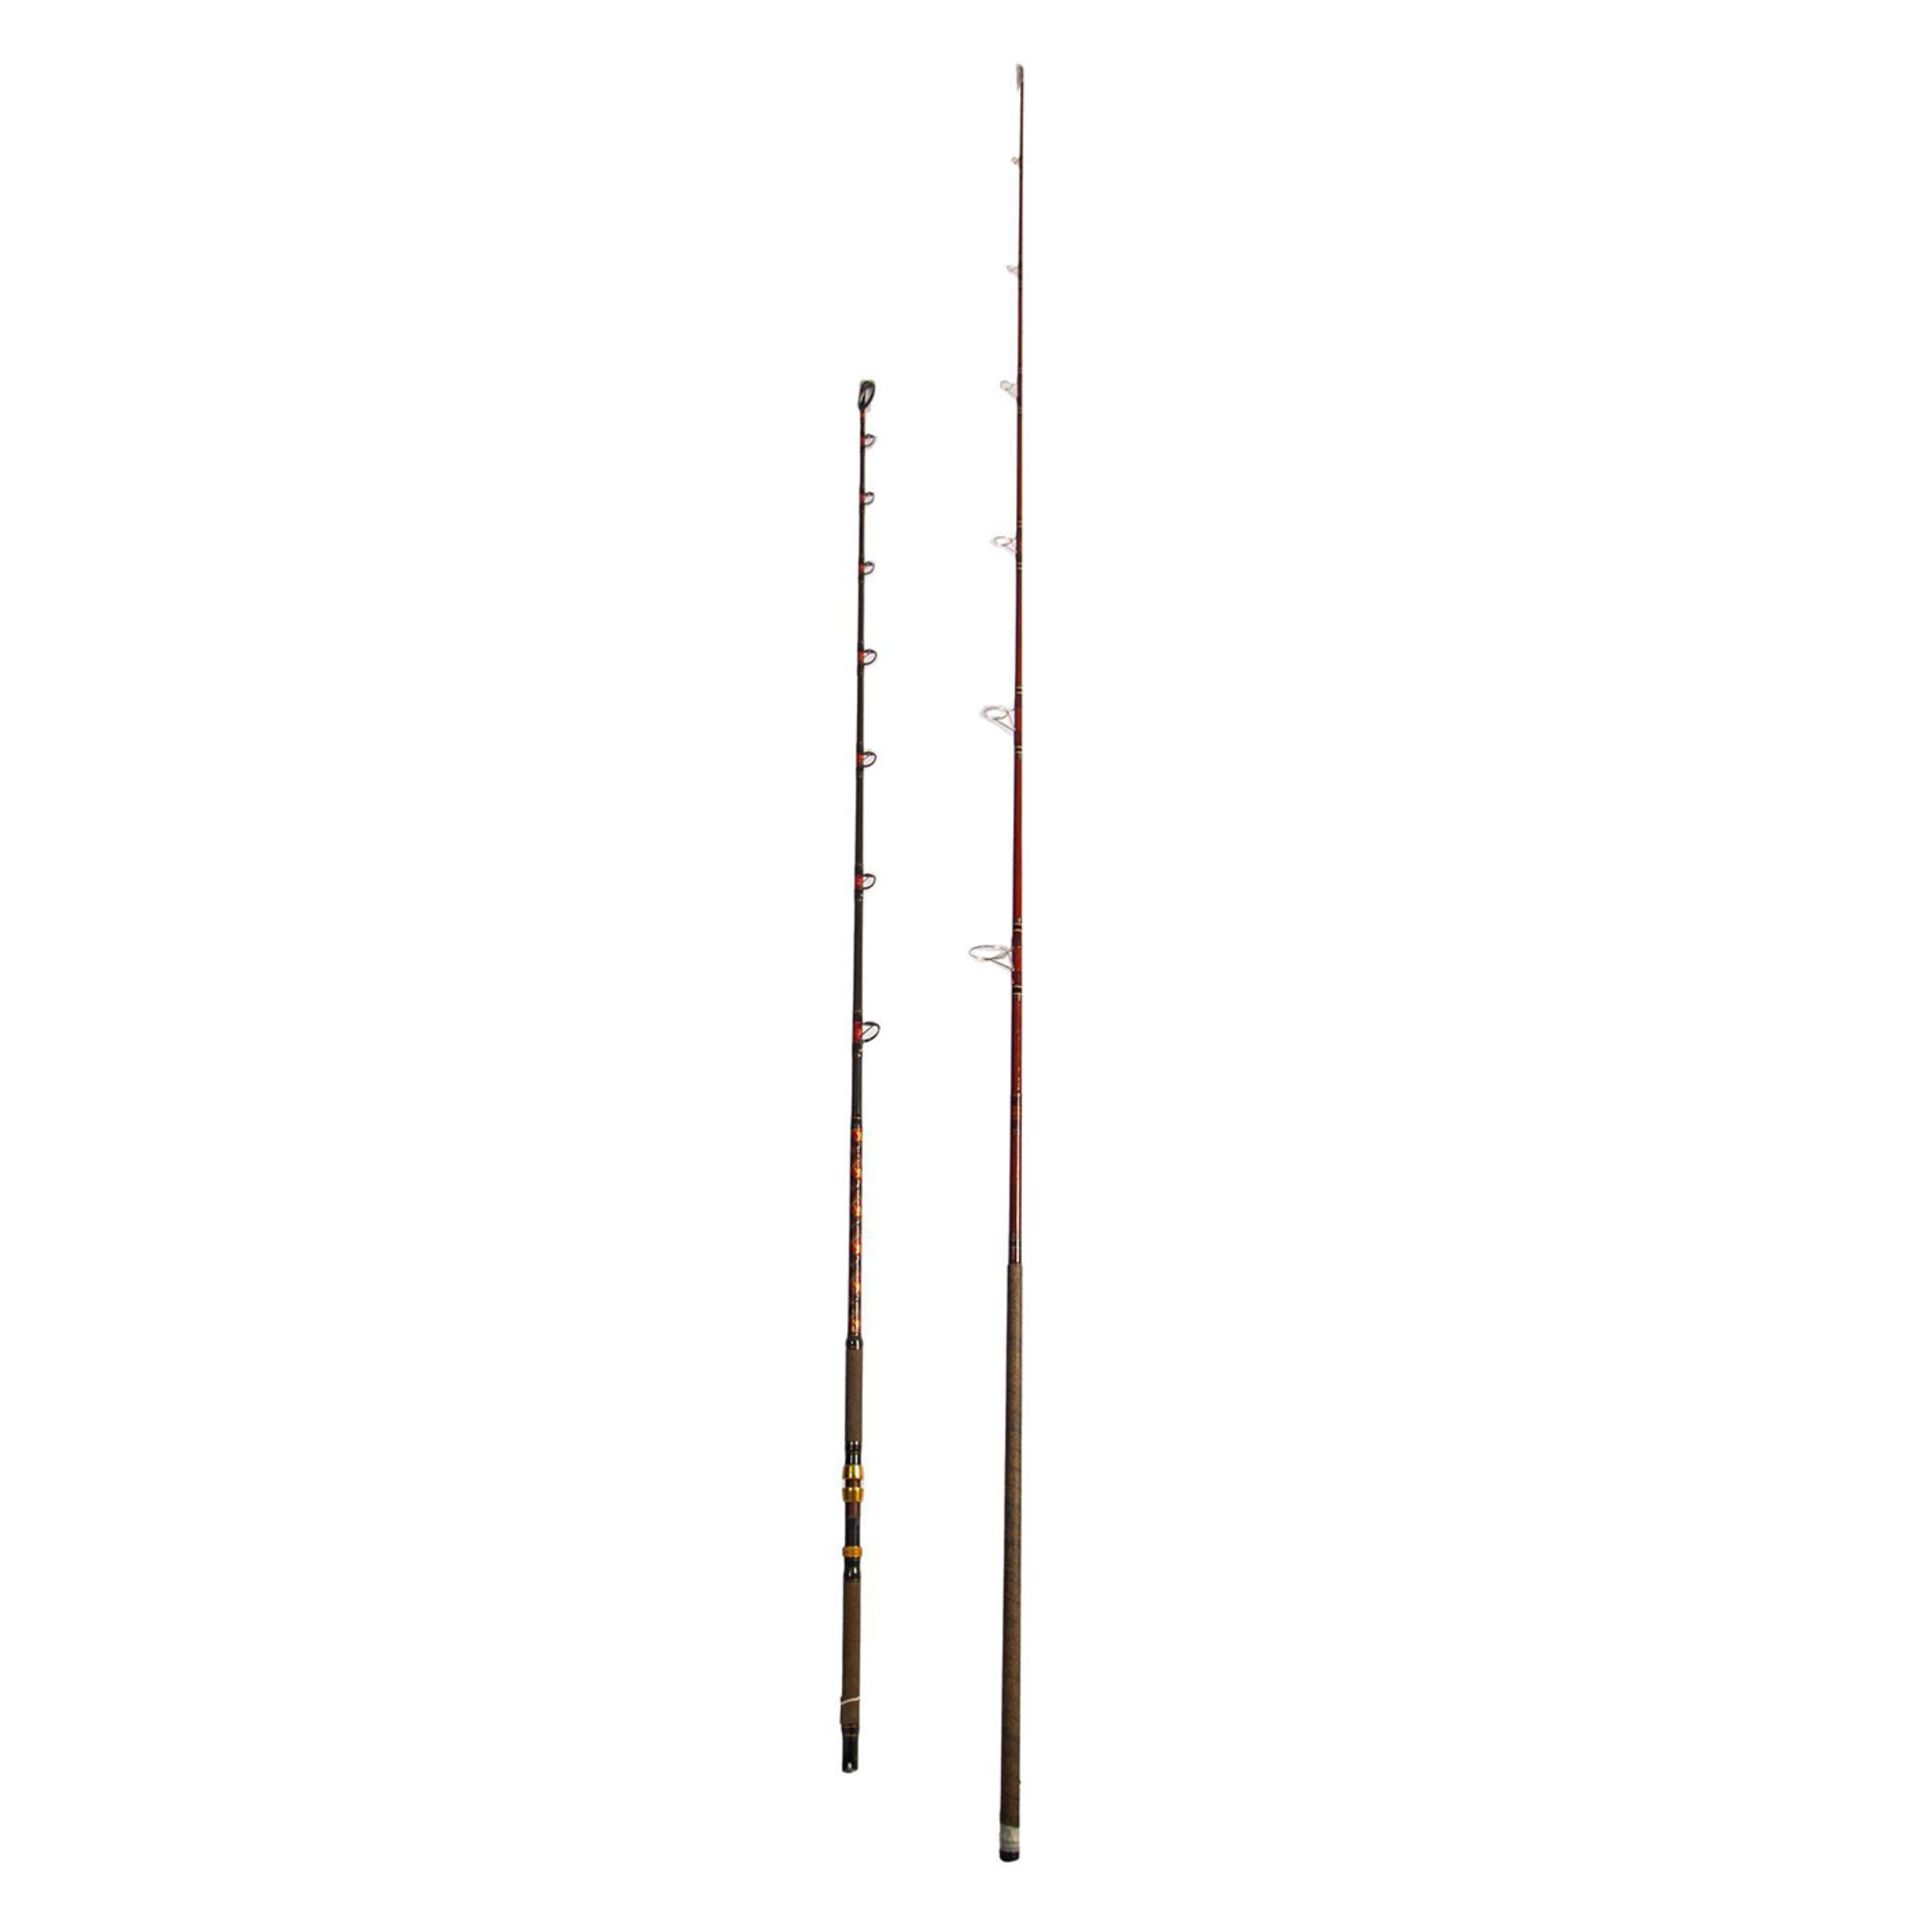 Pair of Vintage Boat Rods Medium and Heavy Power 7-8 Ft. - Image 6 of 6